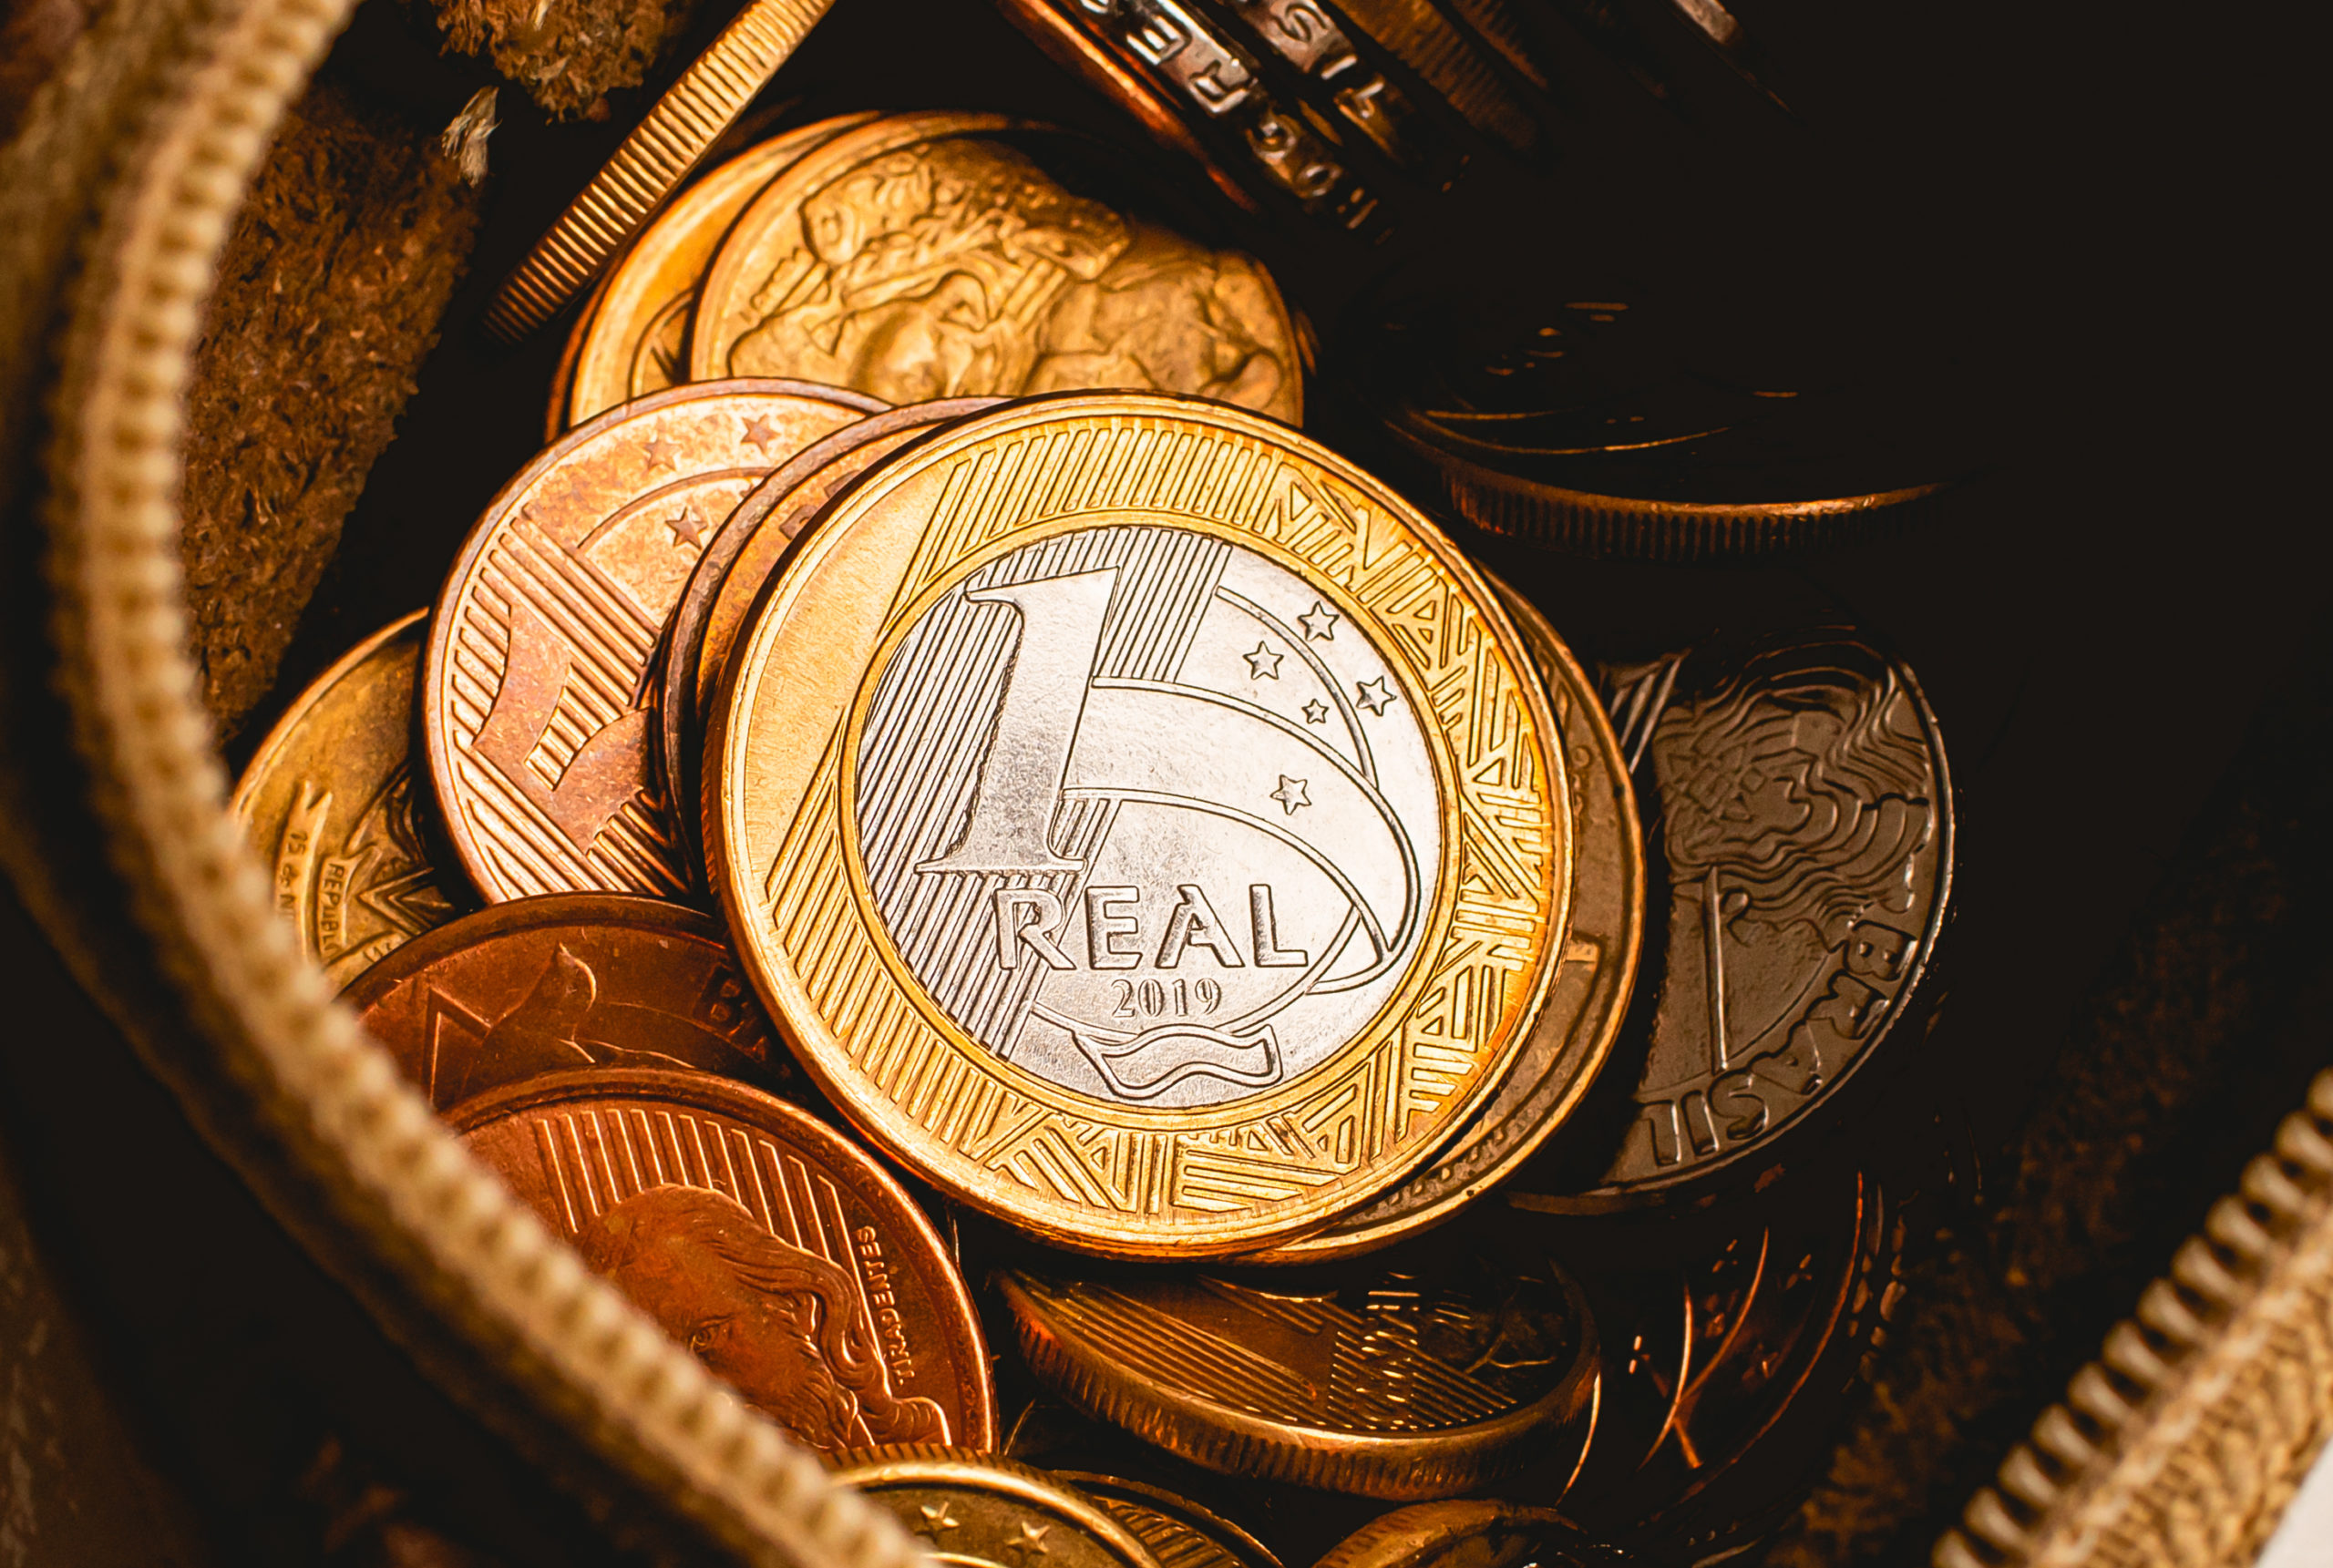 The rare R$1 coin will make you earn up to R$550